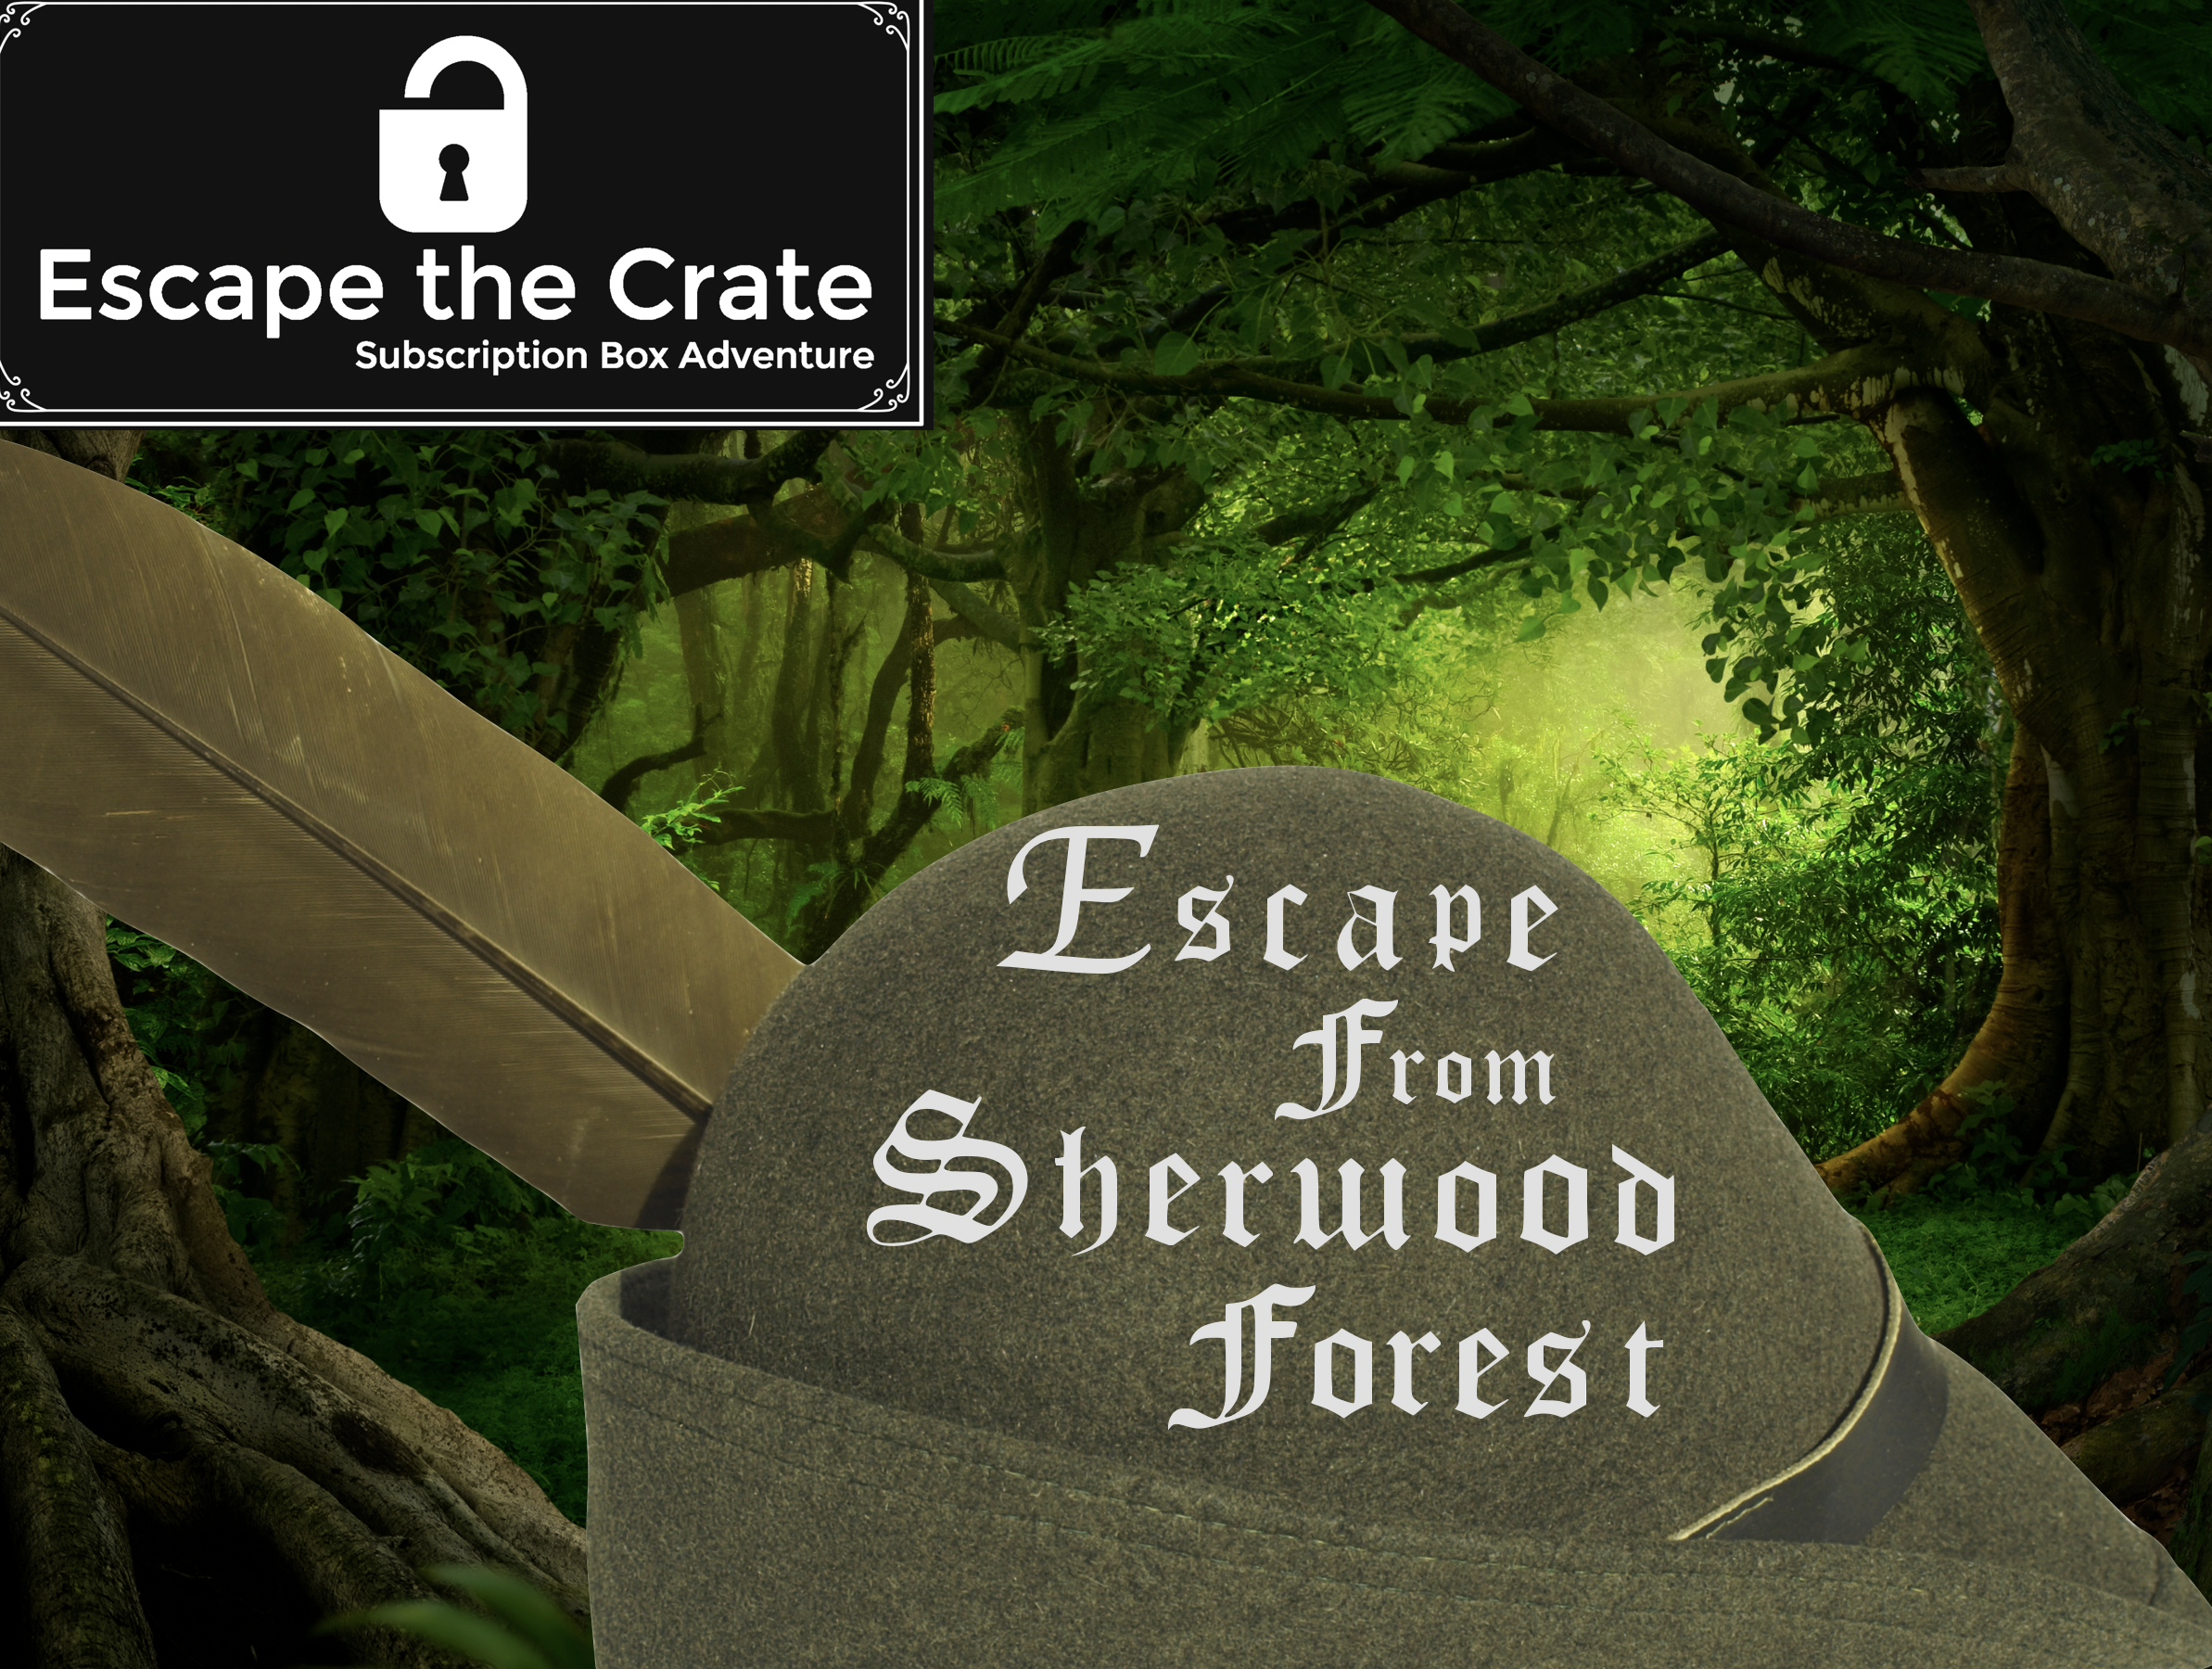 Game 44 - Escape from Sherwood Forest